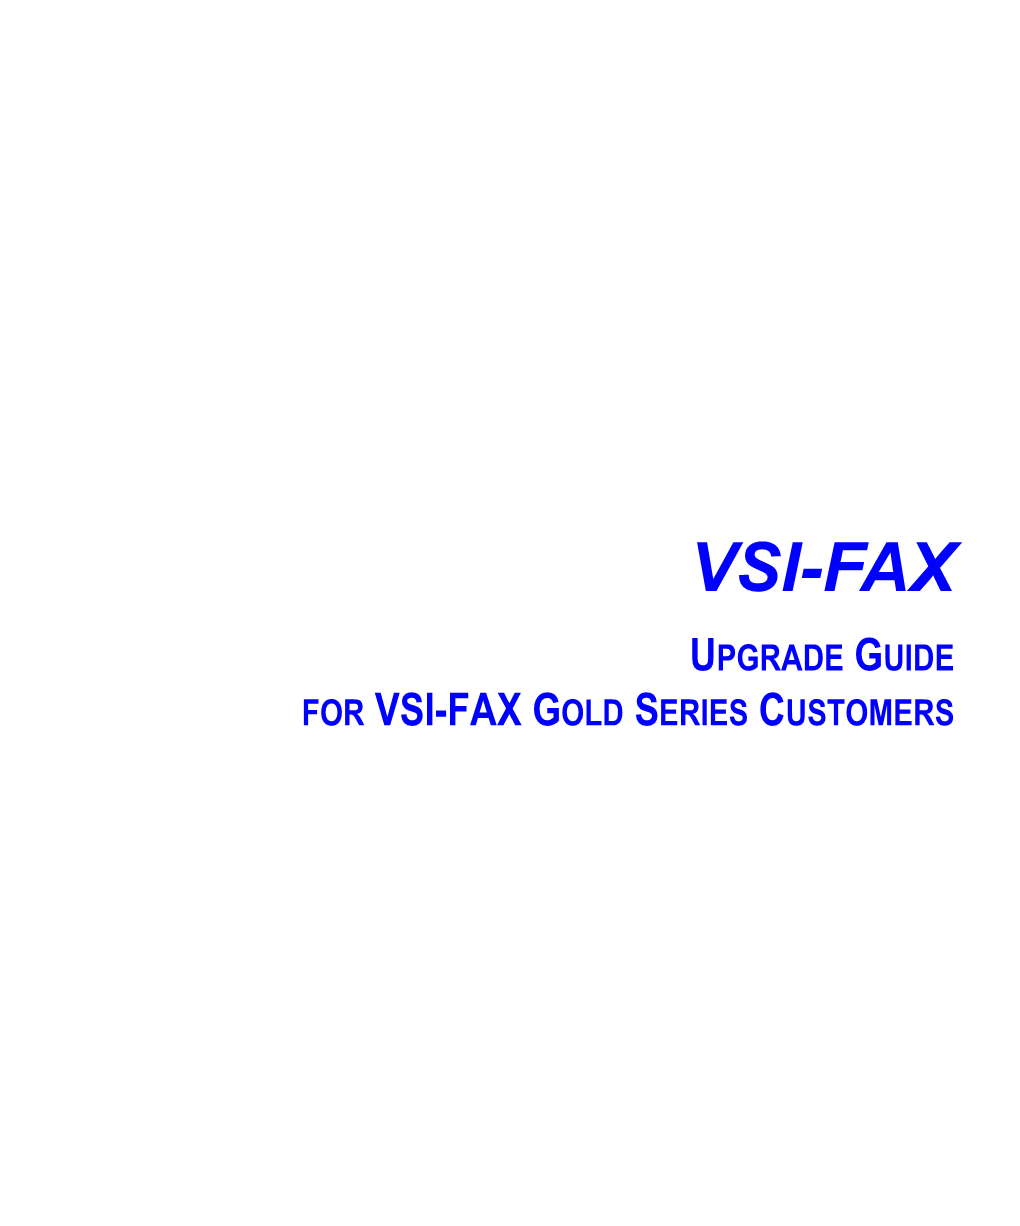 VSI-FAX UPGRADE GUIDE for VSI-FAX GOLD SERIES CUSTOMERS Copyright and Trademark Notices VSI-FAX Version 4.2 Issued June 2002 Copyright © 1989-2002 Esker S.A